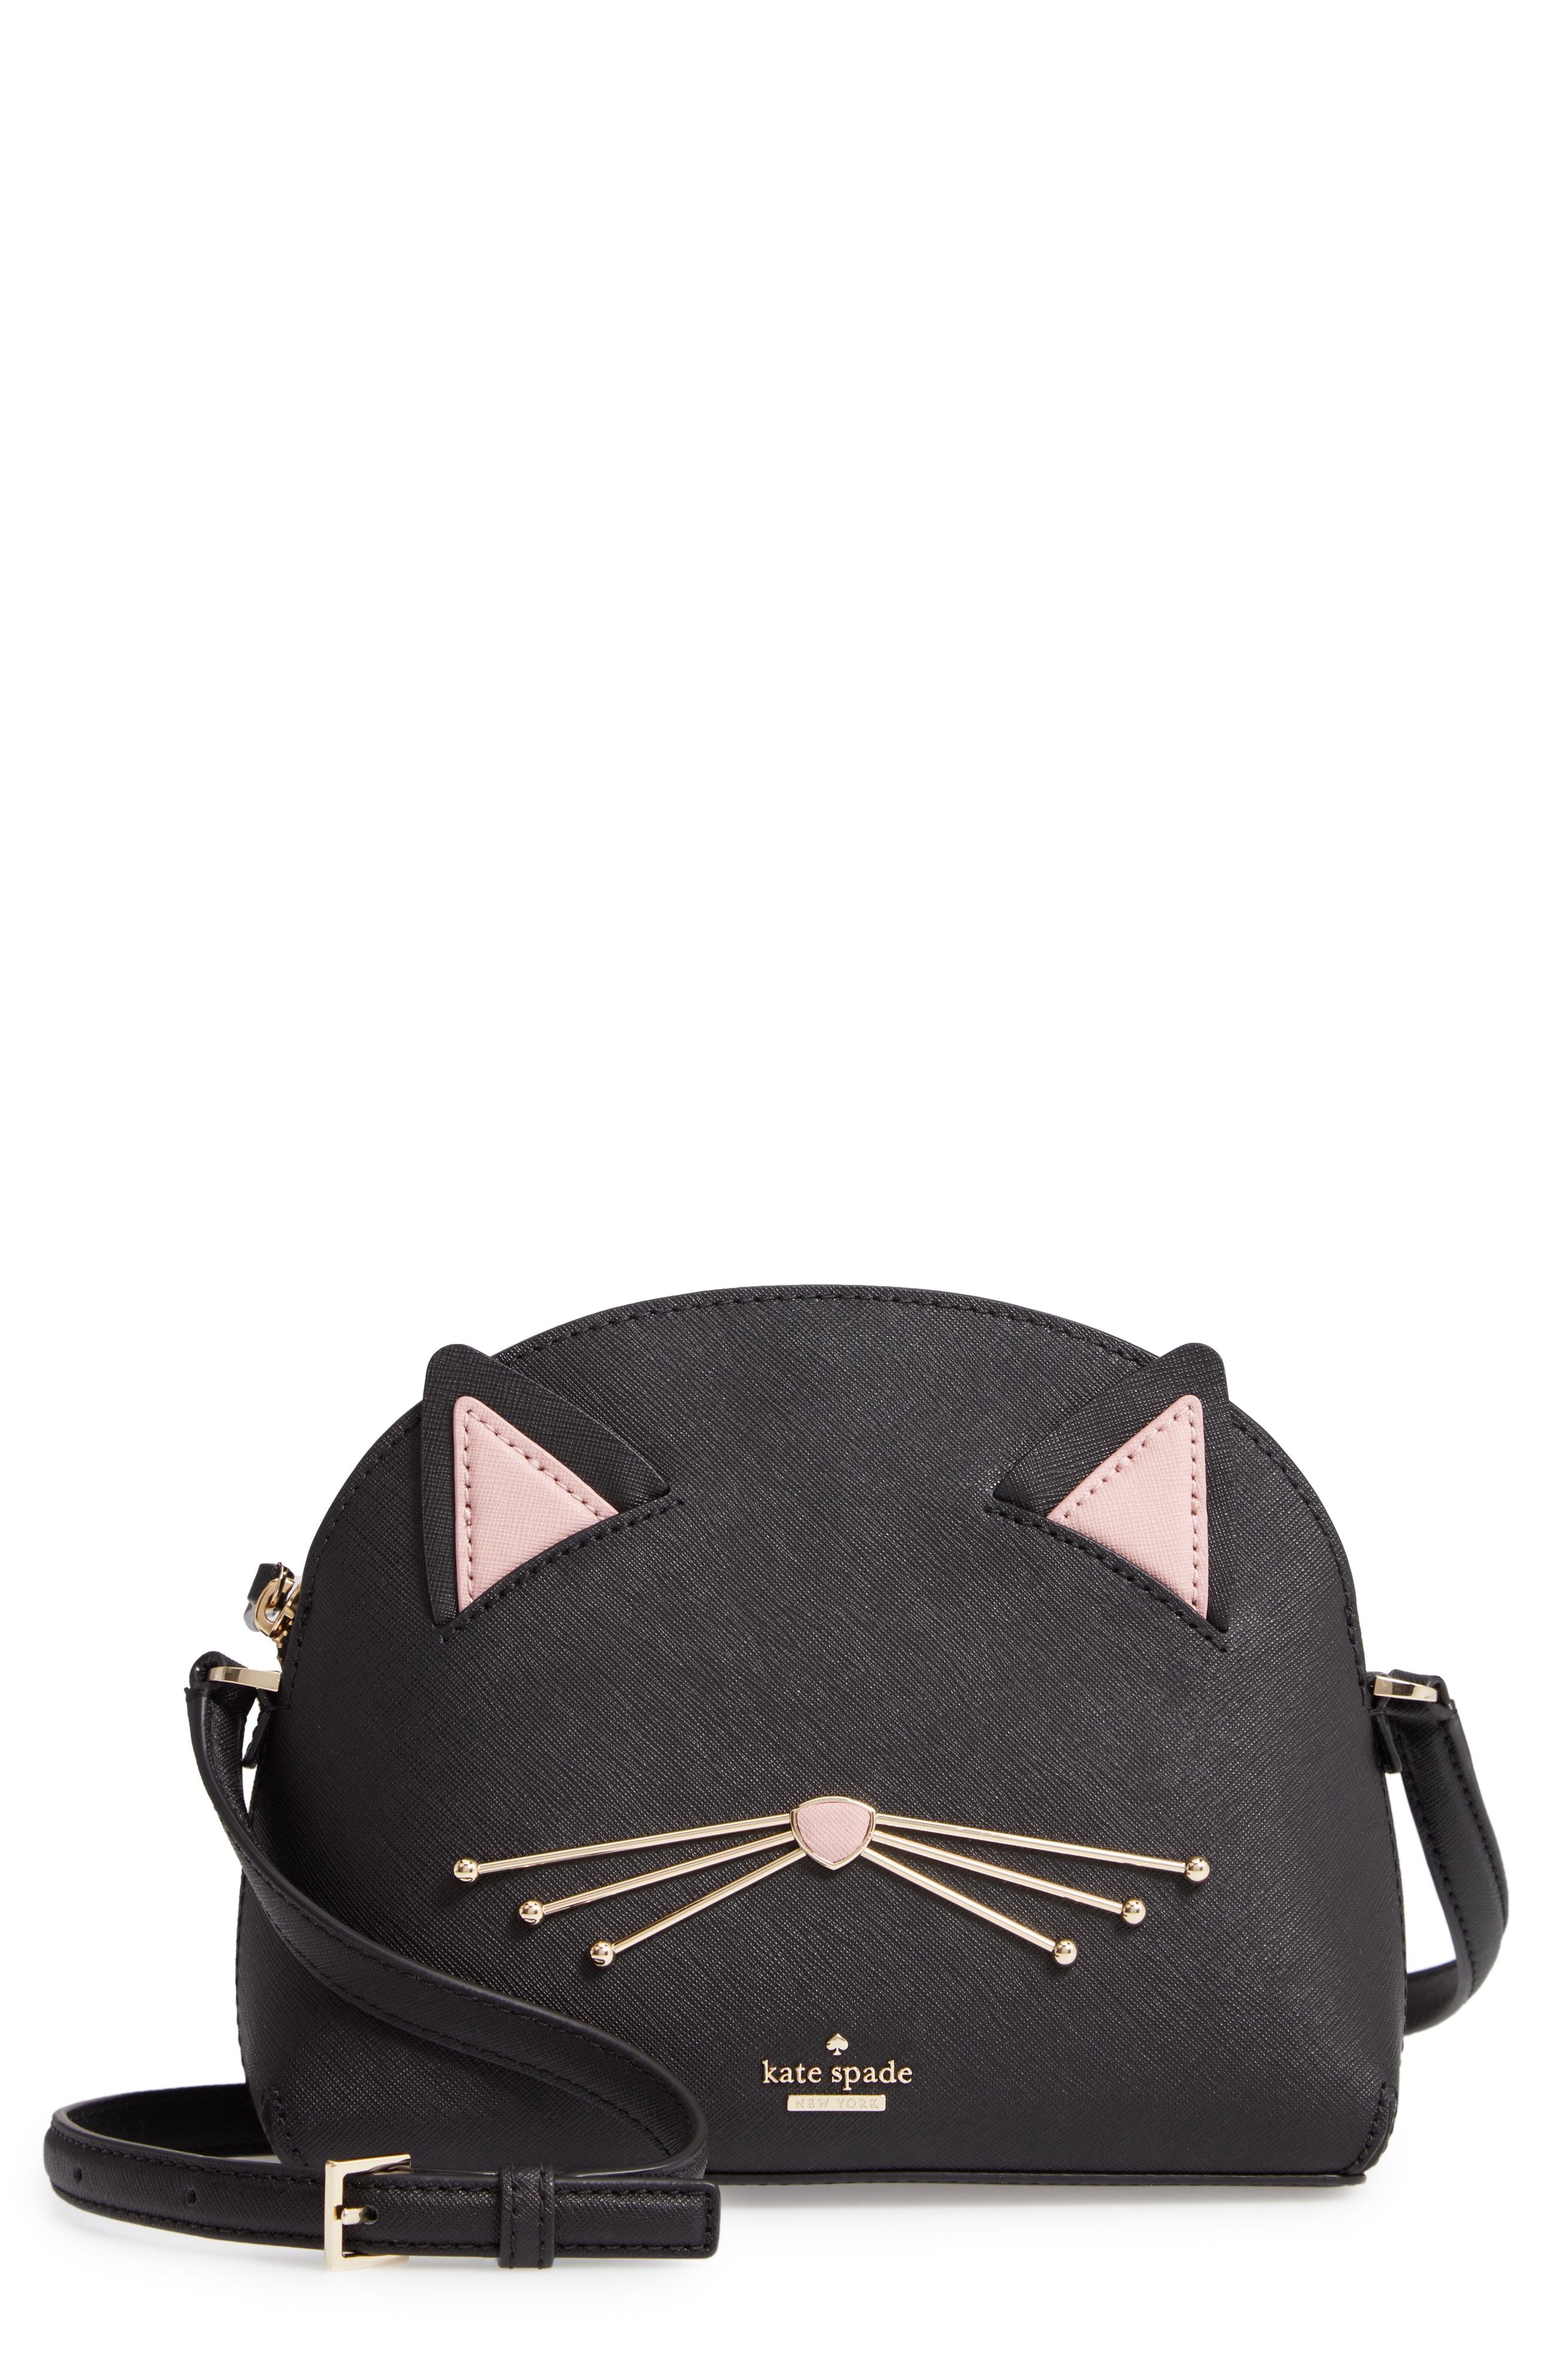 RARE Kate Spade Meow Cat Maise Satchel with matching Coin Purse | eBay